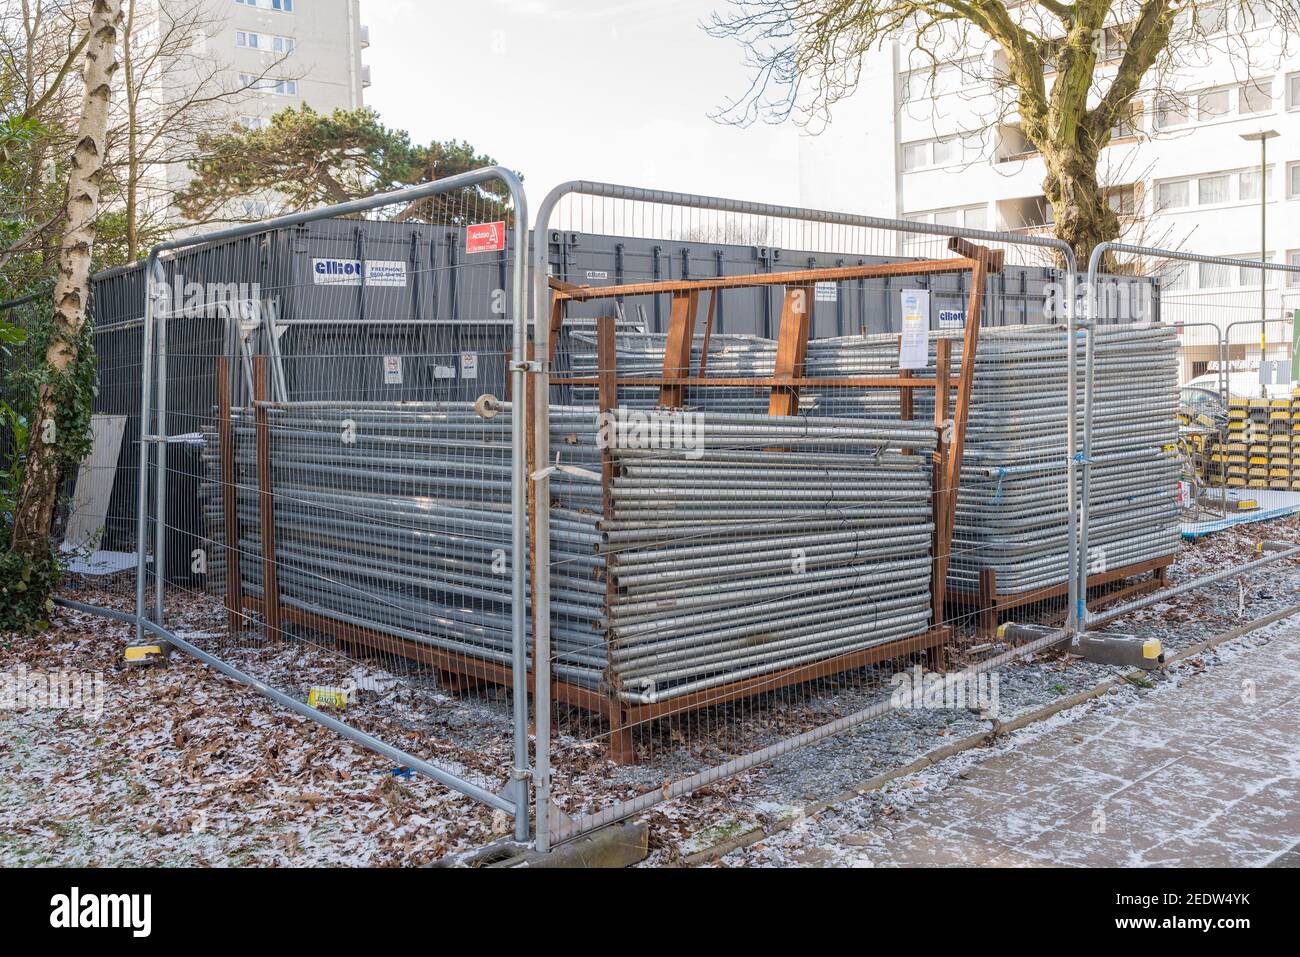 Piles of temporary steel fencing stacked ready for use on a construction site Stock Photo